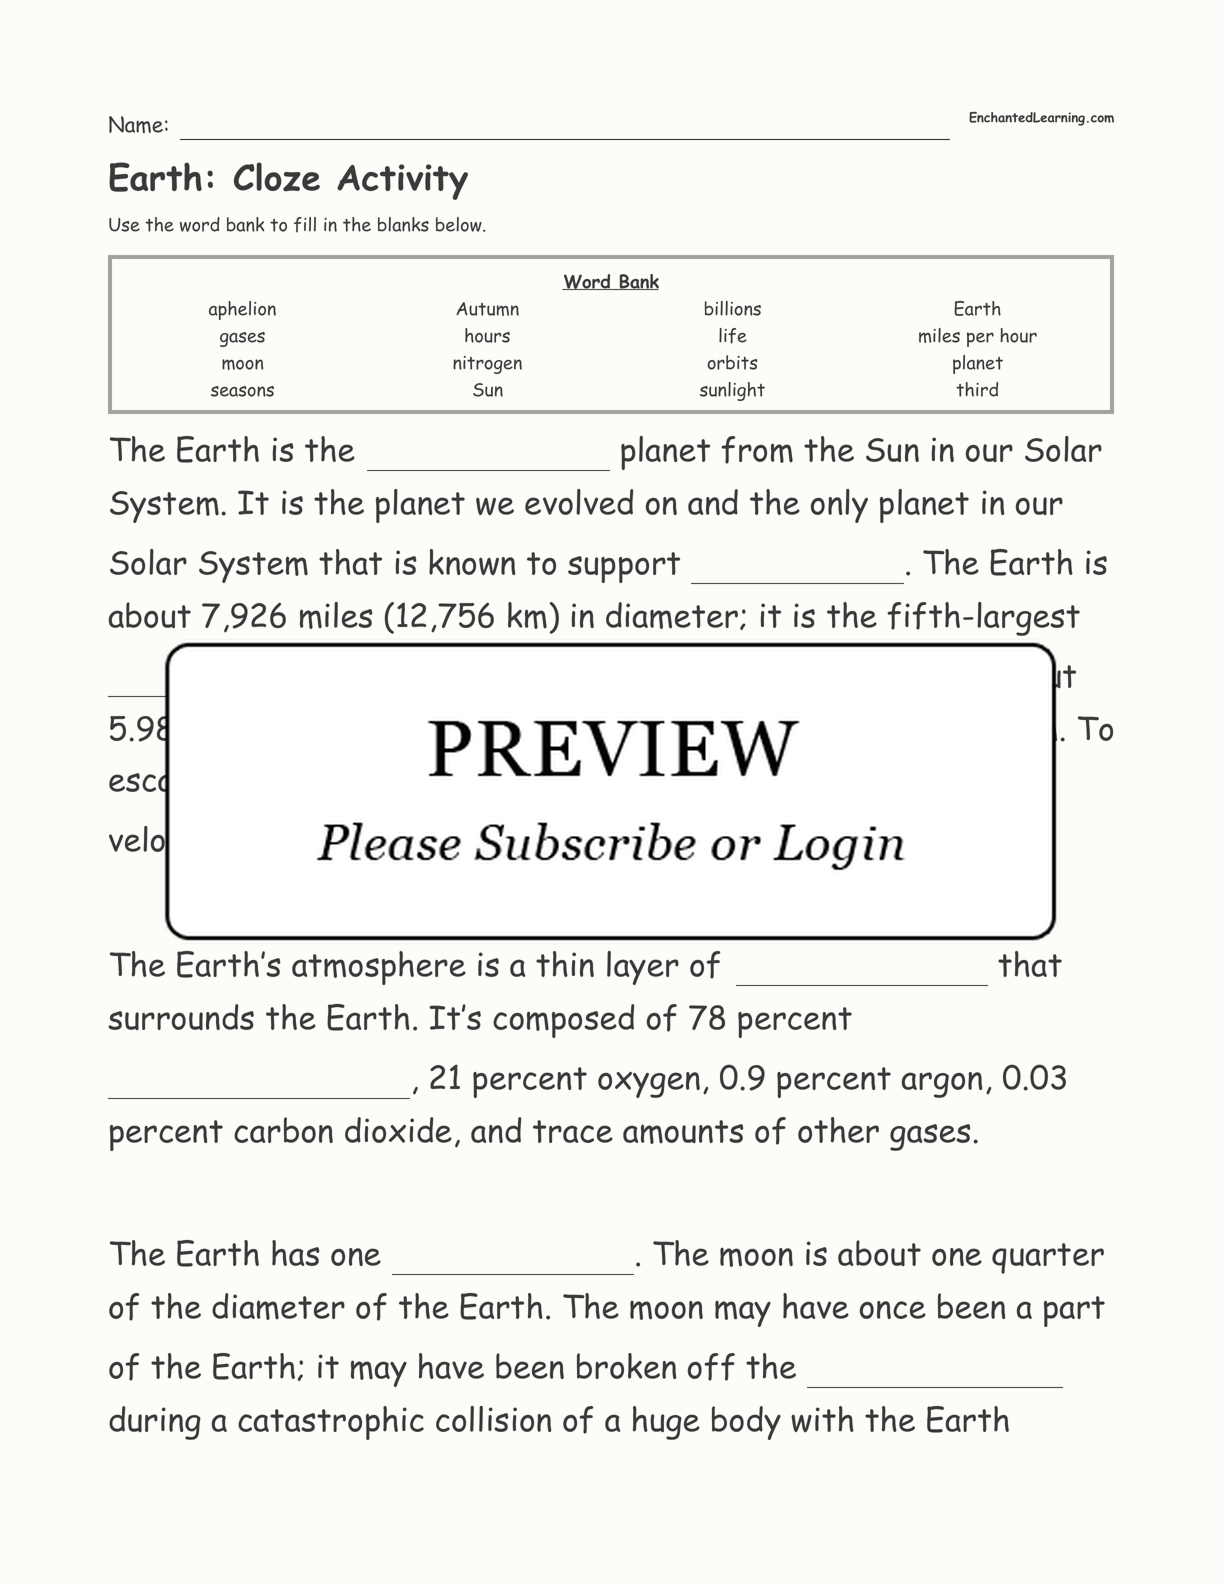 Earth: Cloze Activity interactive worksheet page 1